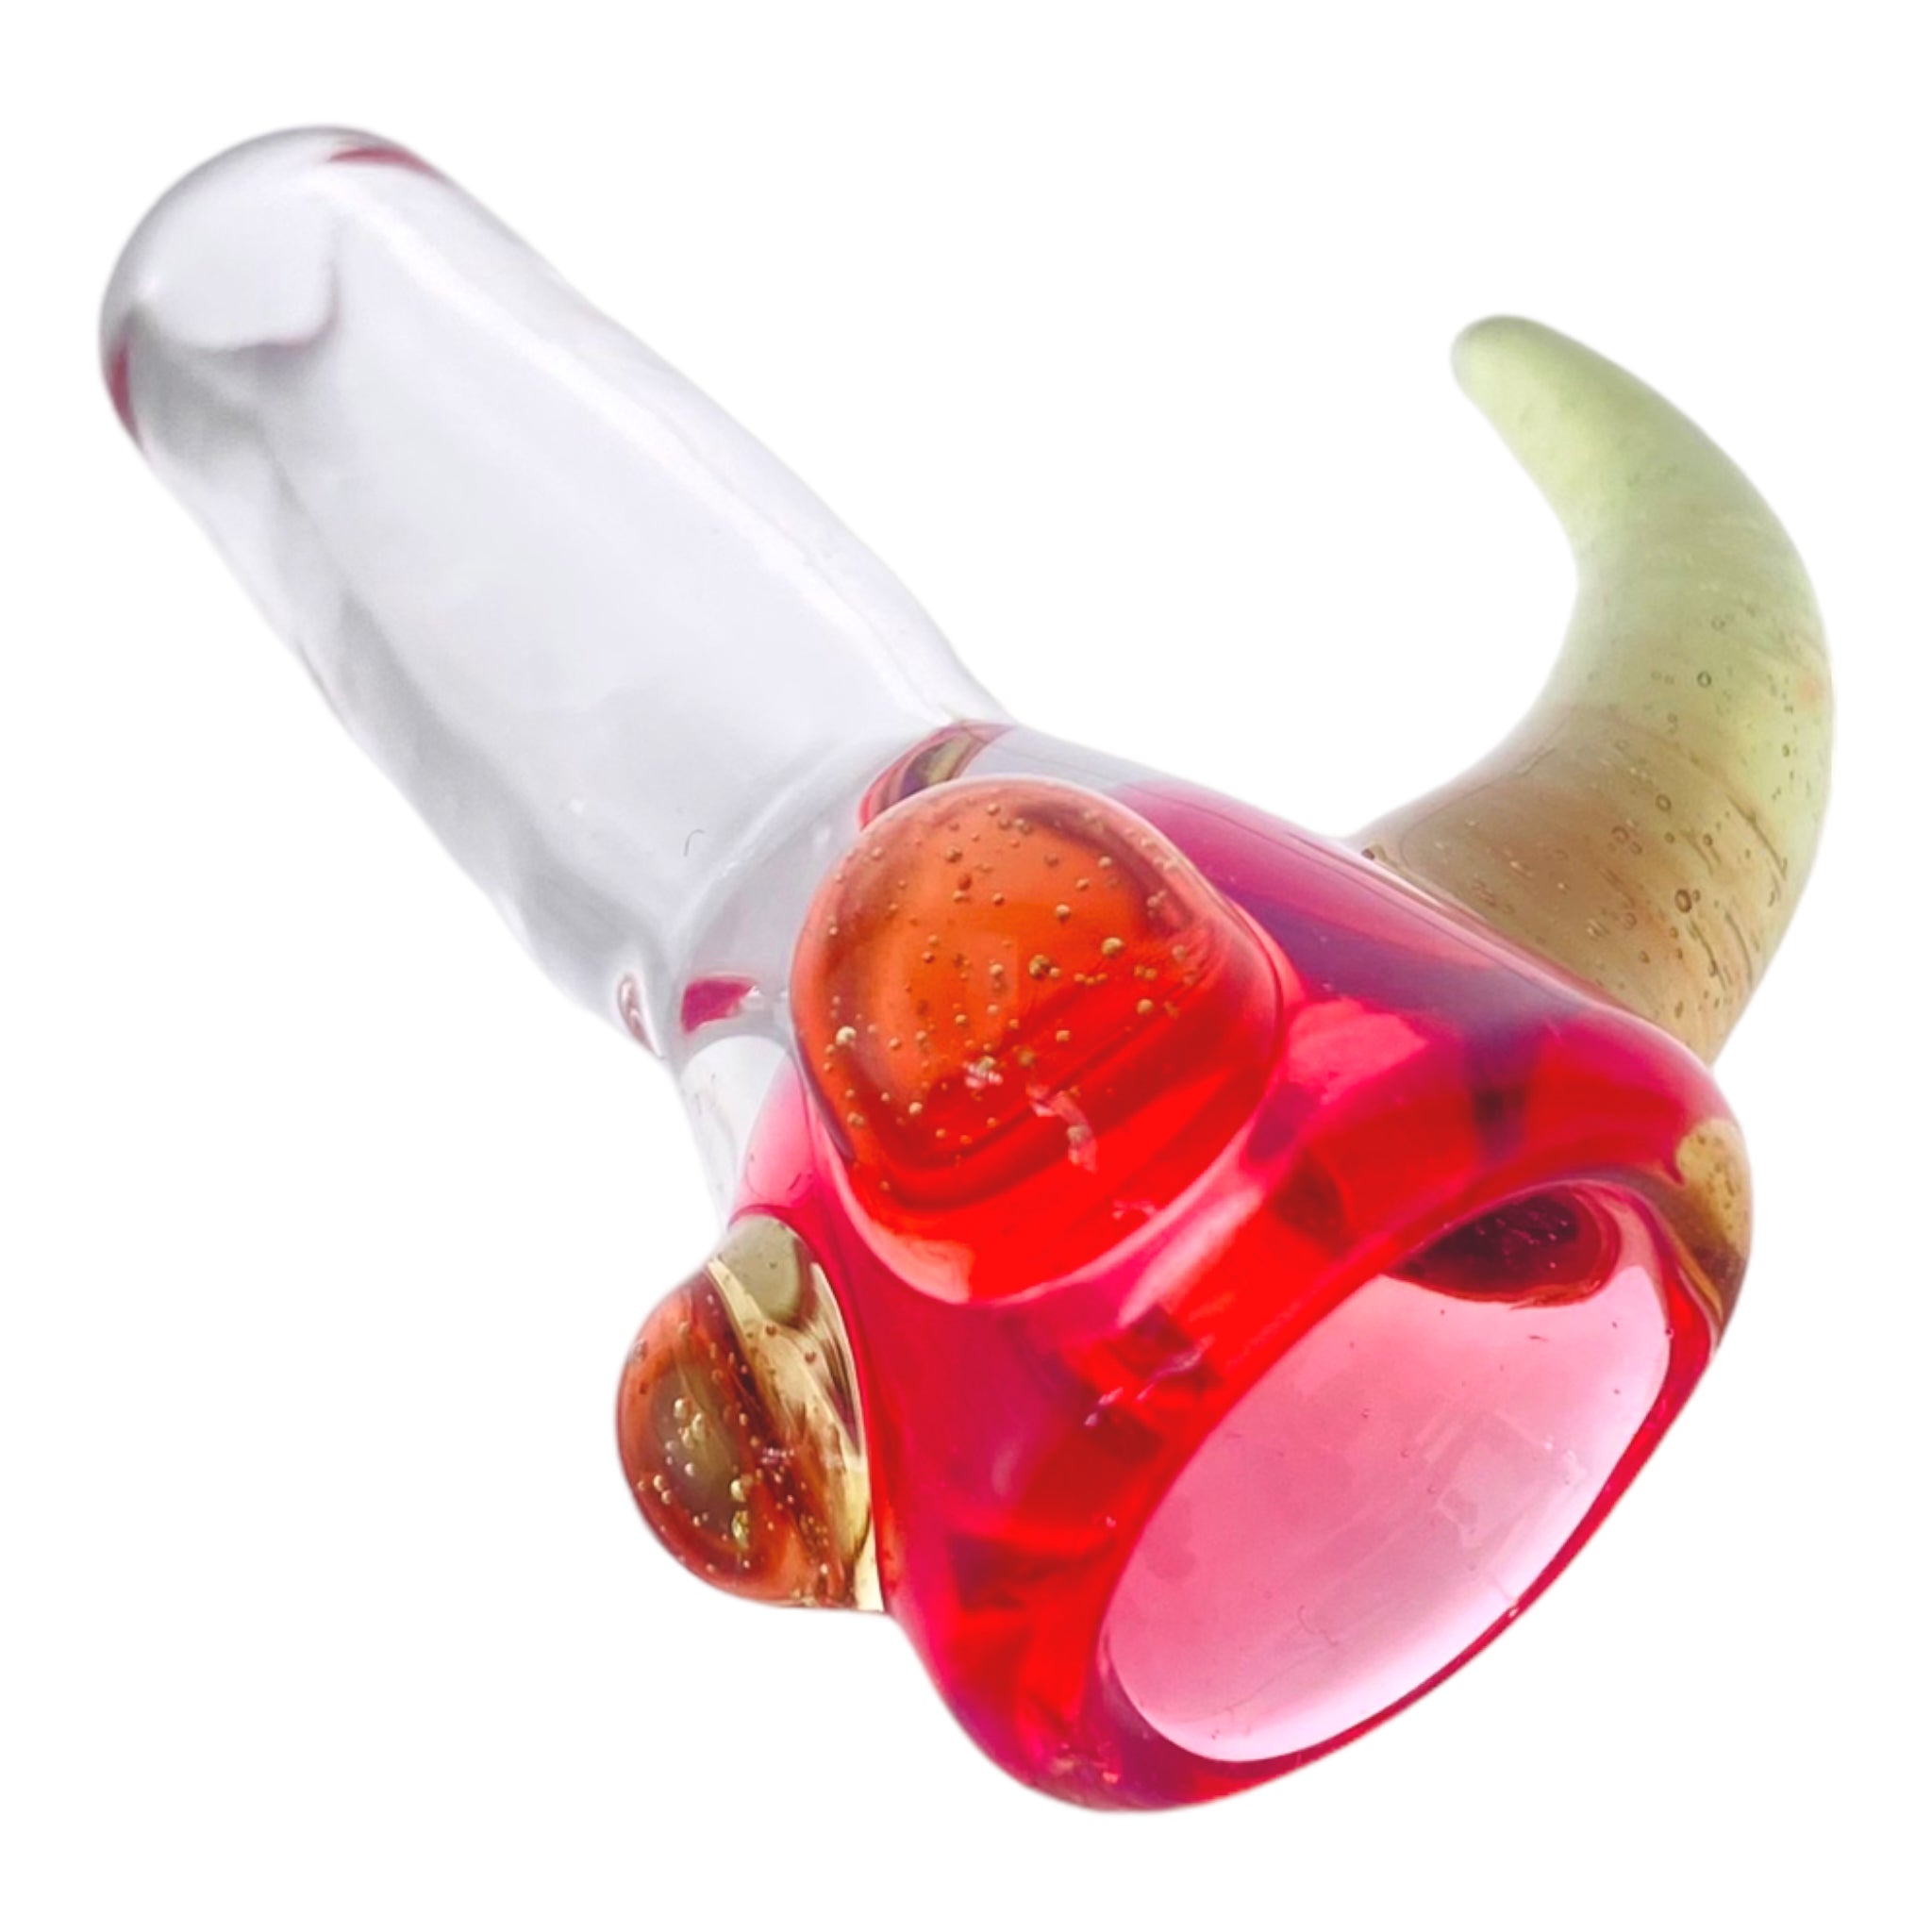 Arko Glass - 14mm Flower Bowl - Crimson Pink With Forest Green Handle & Dots